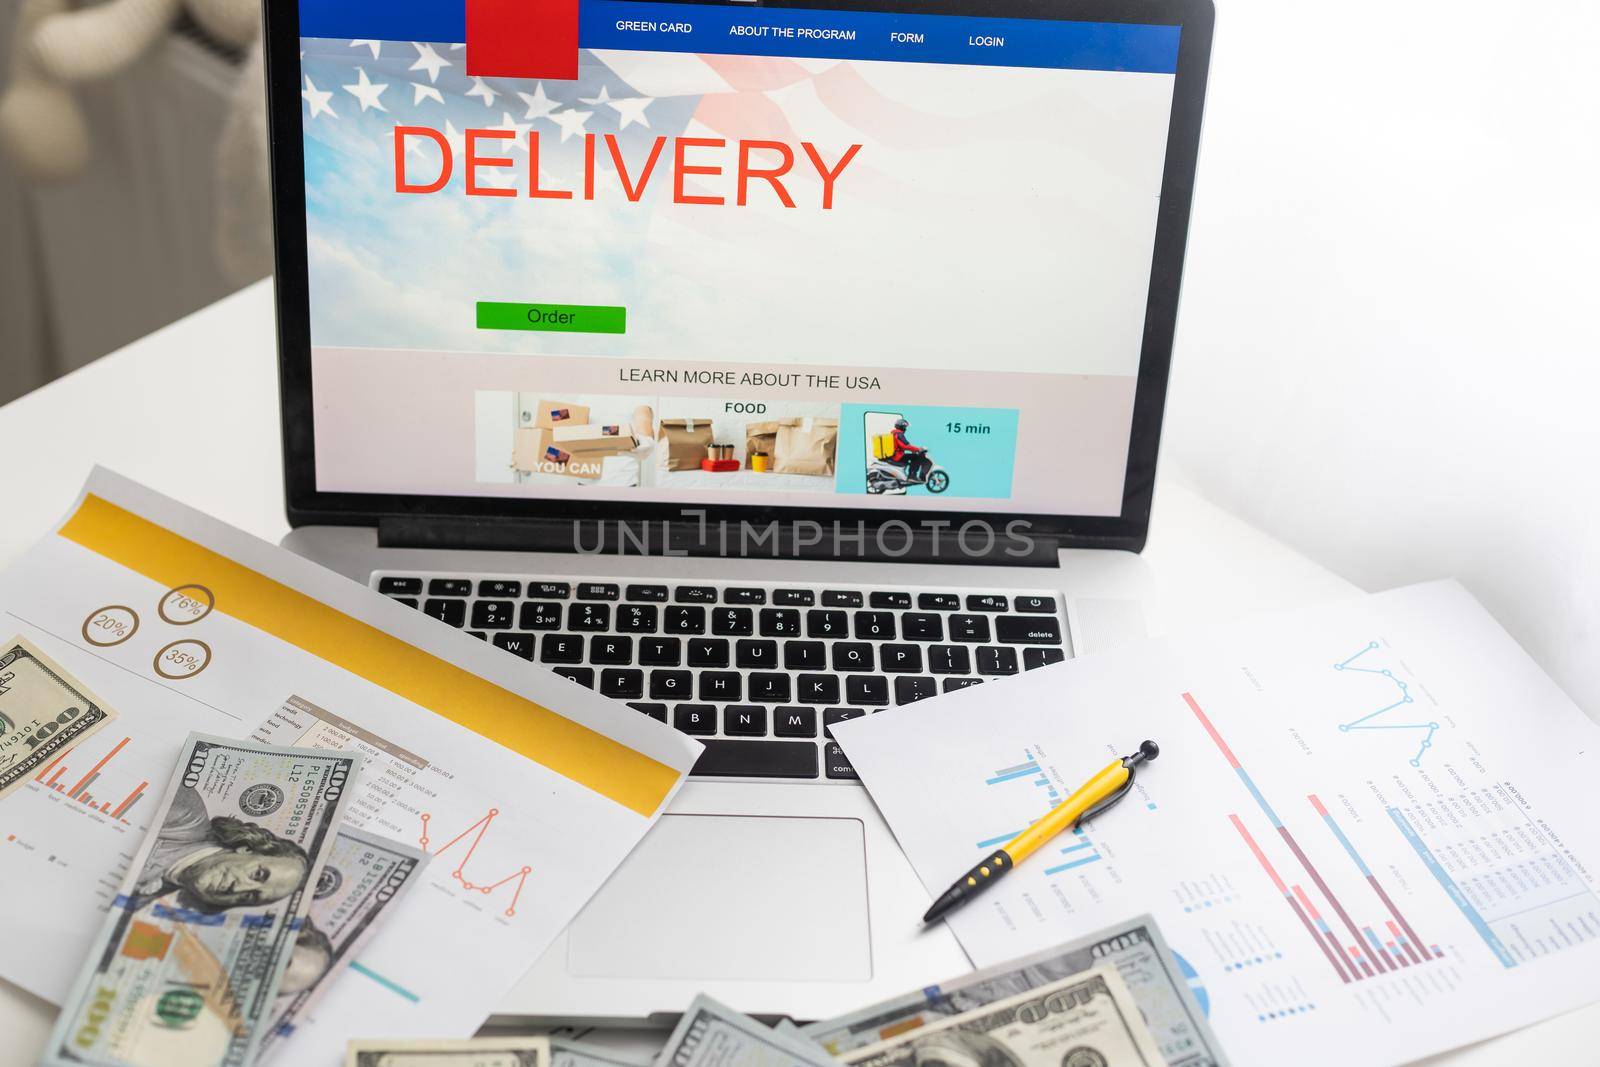 Online shopping ecommerce and shipping concepts A cardboard box with a cart or cart logo on a laptop keyboard represents a customer placing an order from a retail store over the Internet. by Andelov13